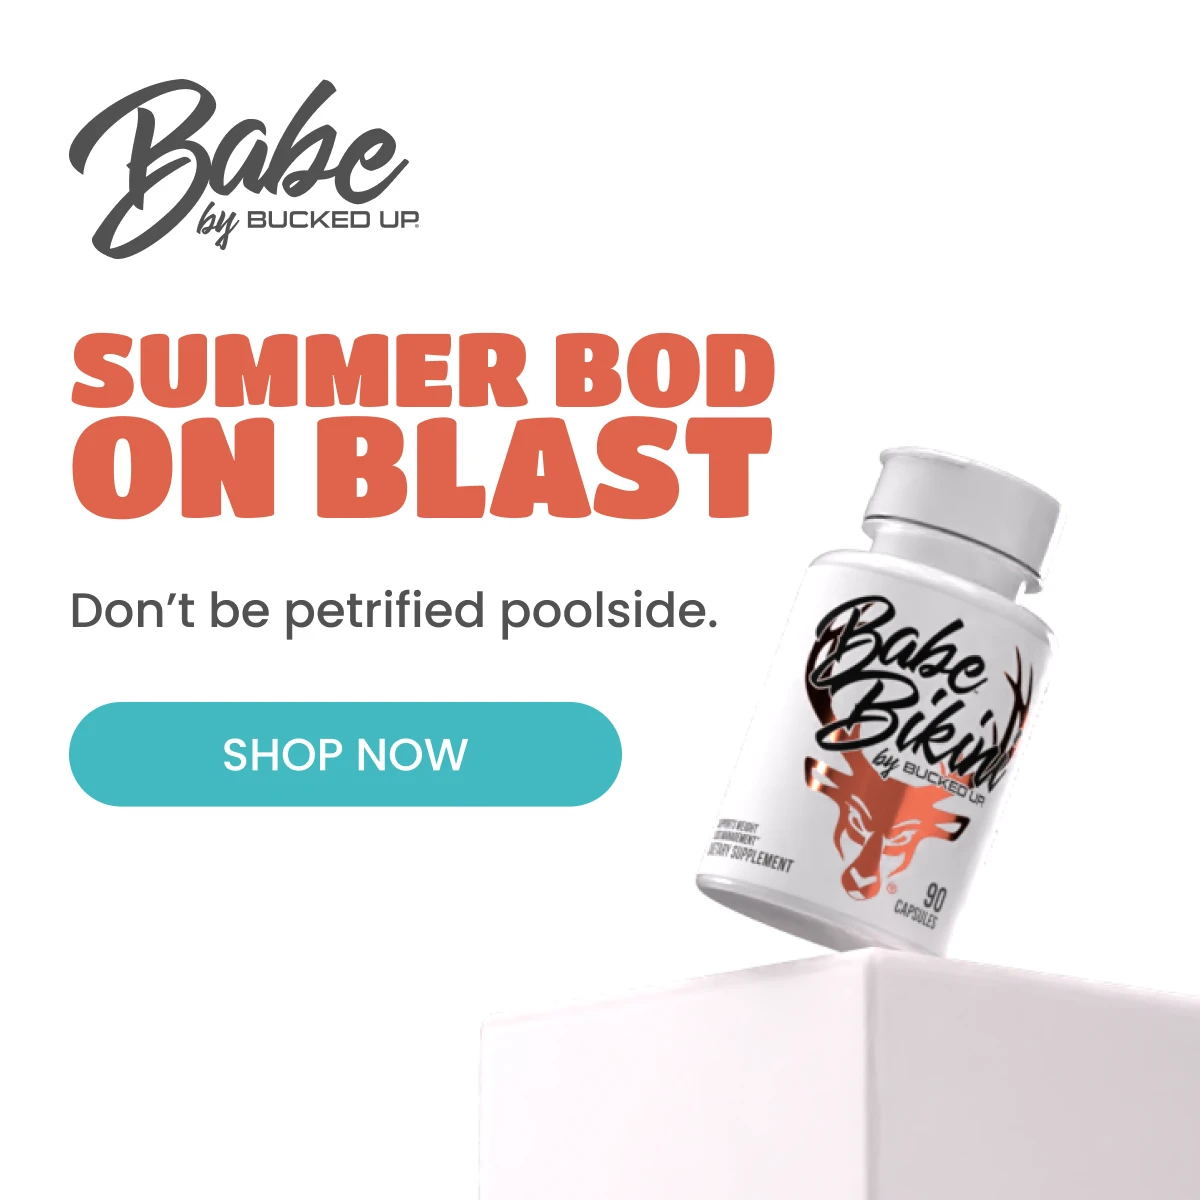 Babe Bikini - Text reads "summer bod on blast, don't be petrified poolside".  Button reads "SHOP NOW".  Image of the new Babe Bikini Product.